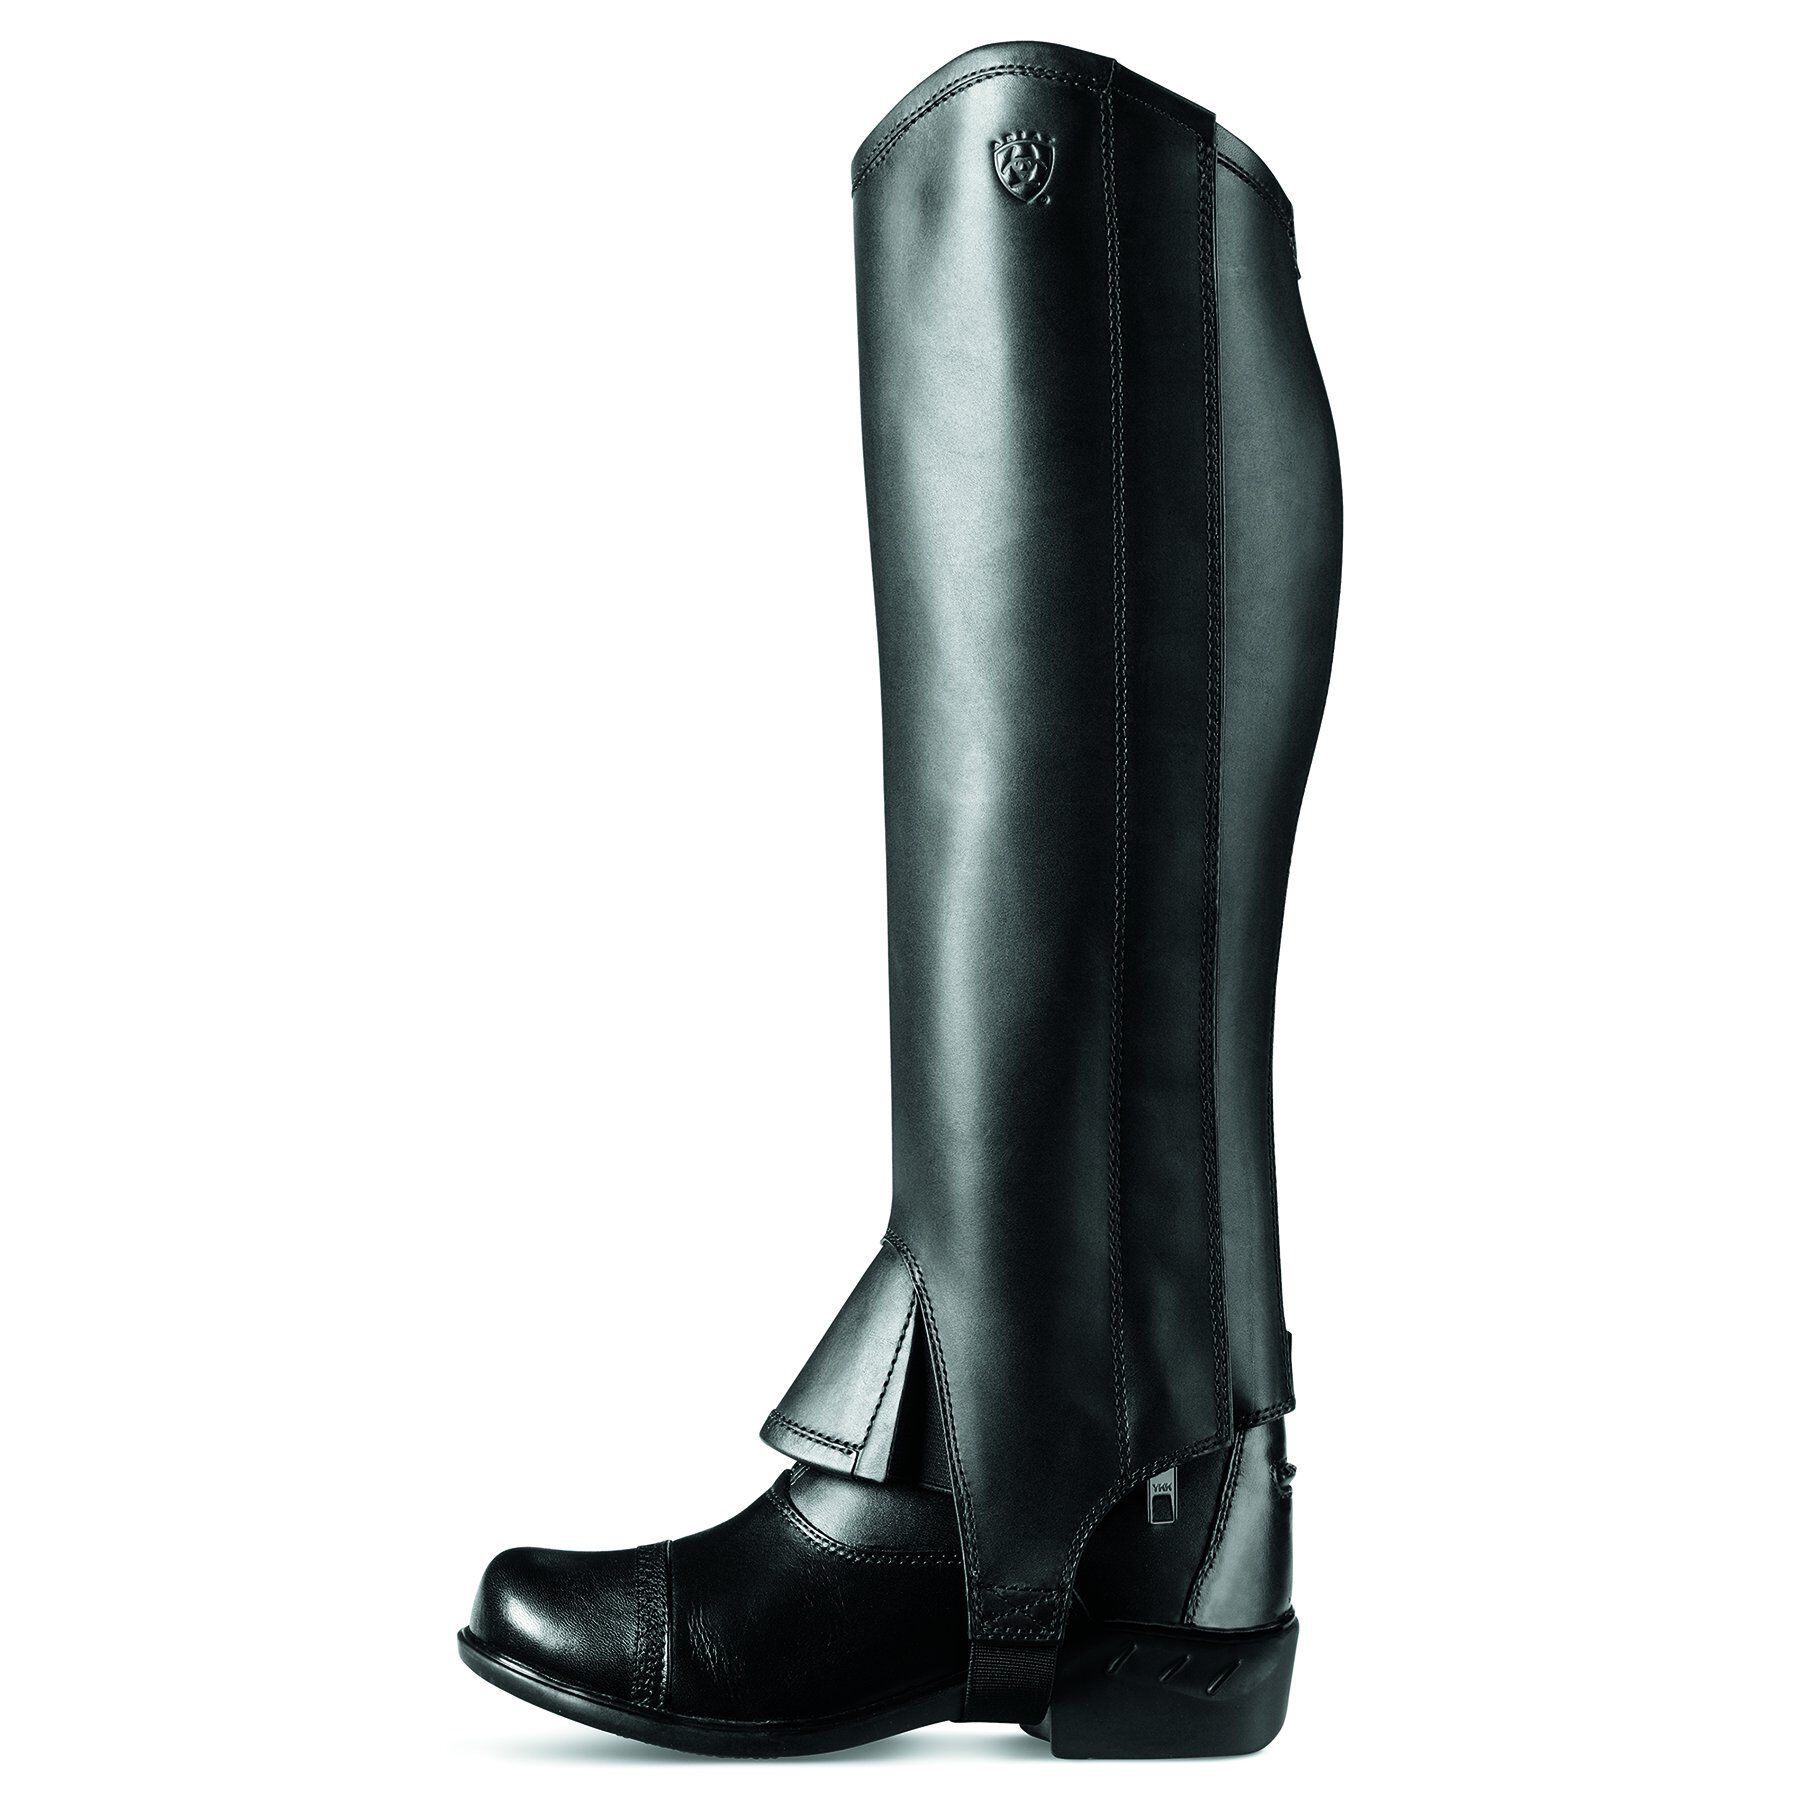 Ariat Classic Chap III BLACK Various sizes available 